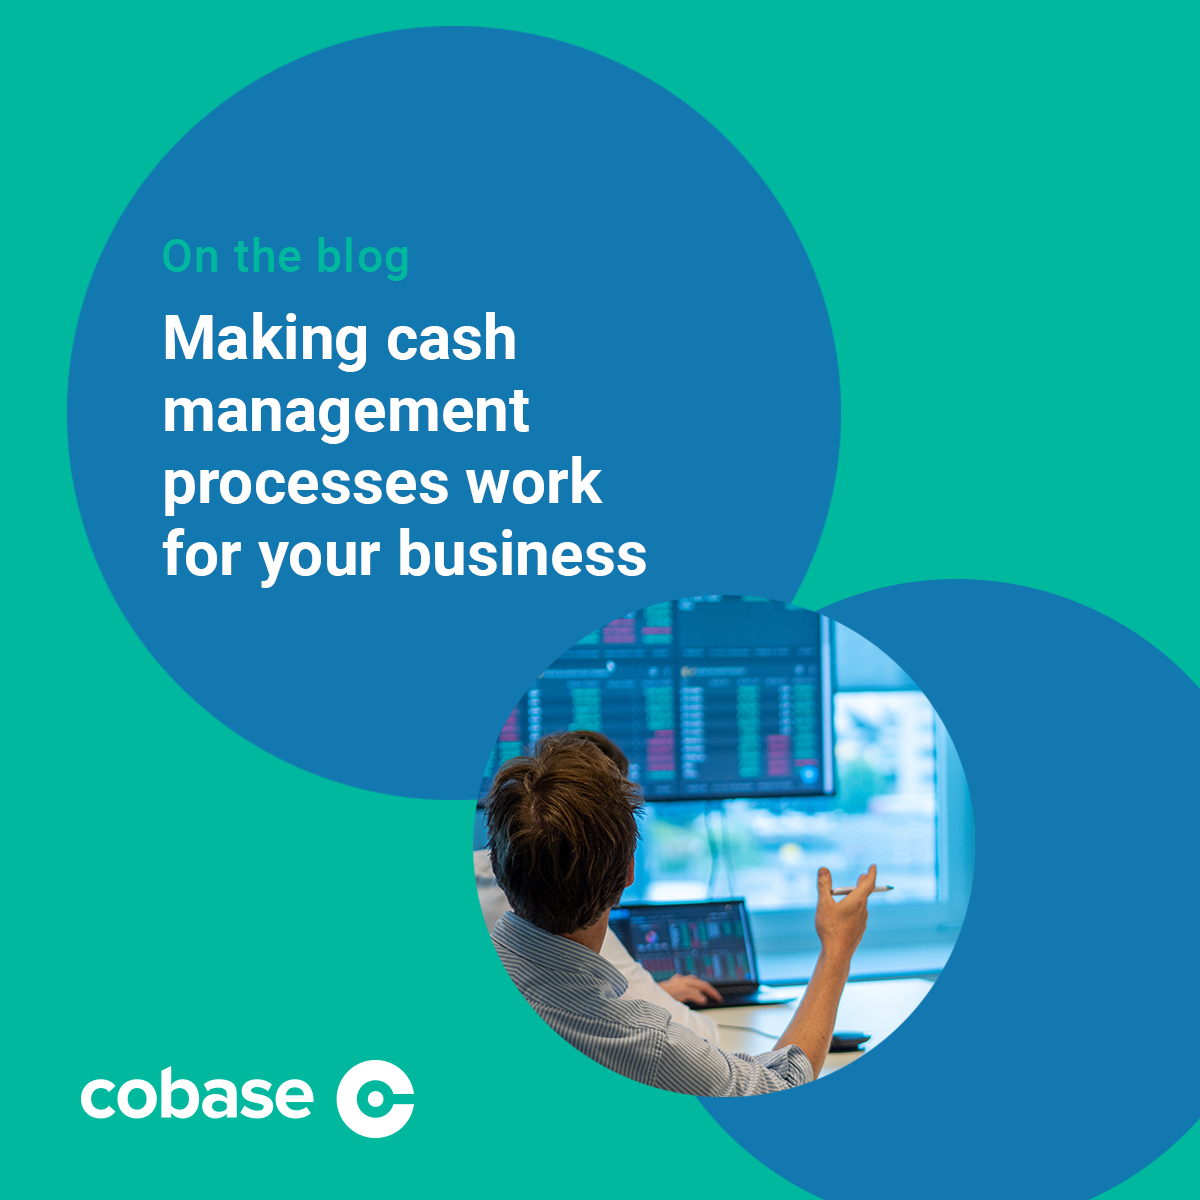 Making cash management processes work for business